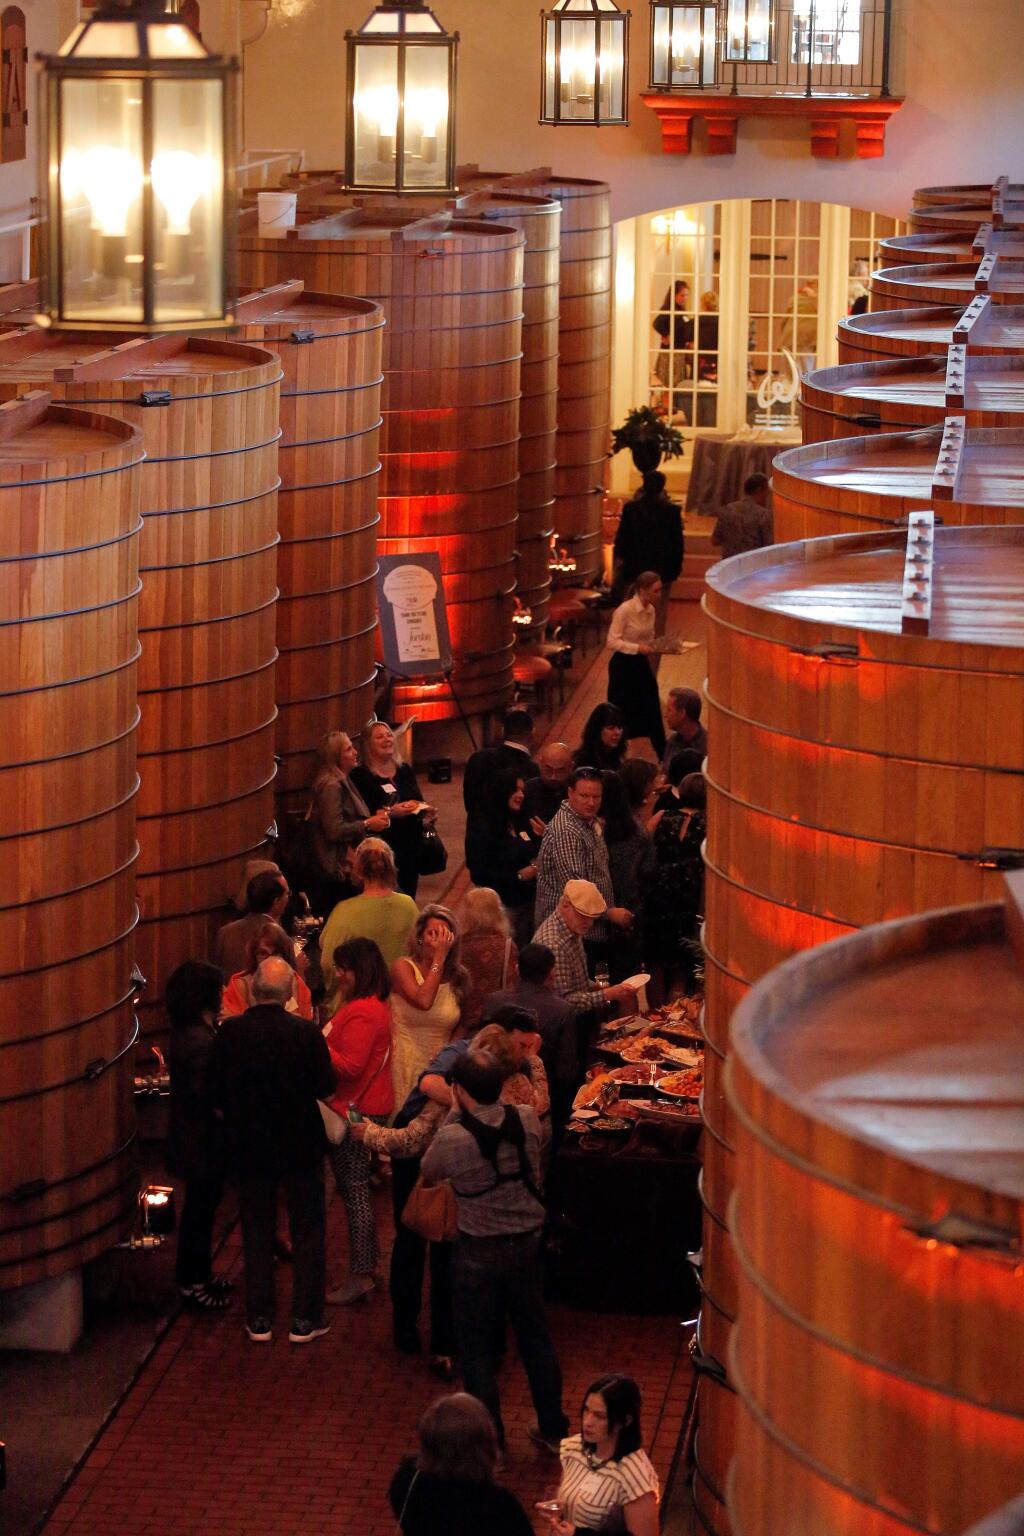 Guests enjoy wine, food and live music inside the Jordan Winery oak tank room during Reading Between the Vines, a fundraiser for United Way of the Wine Country's education initiatives, at Jordan Vineyard and Winery in Healdsburg, California, on Friday, March 31, 2017. (Alvin Jornada / The Press Democrat)